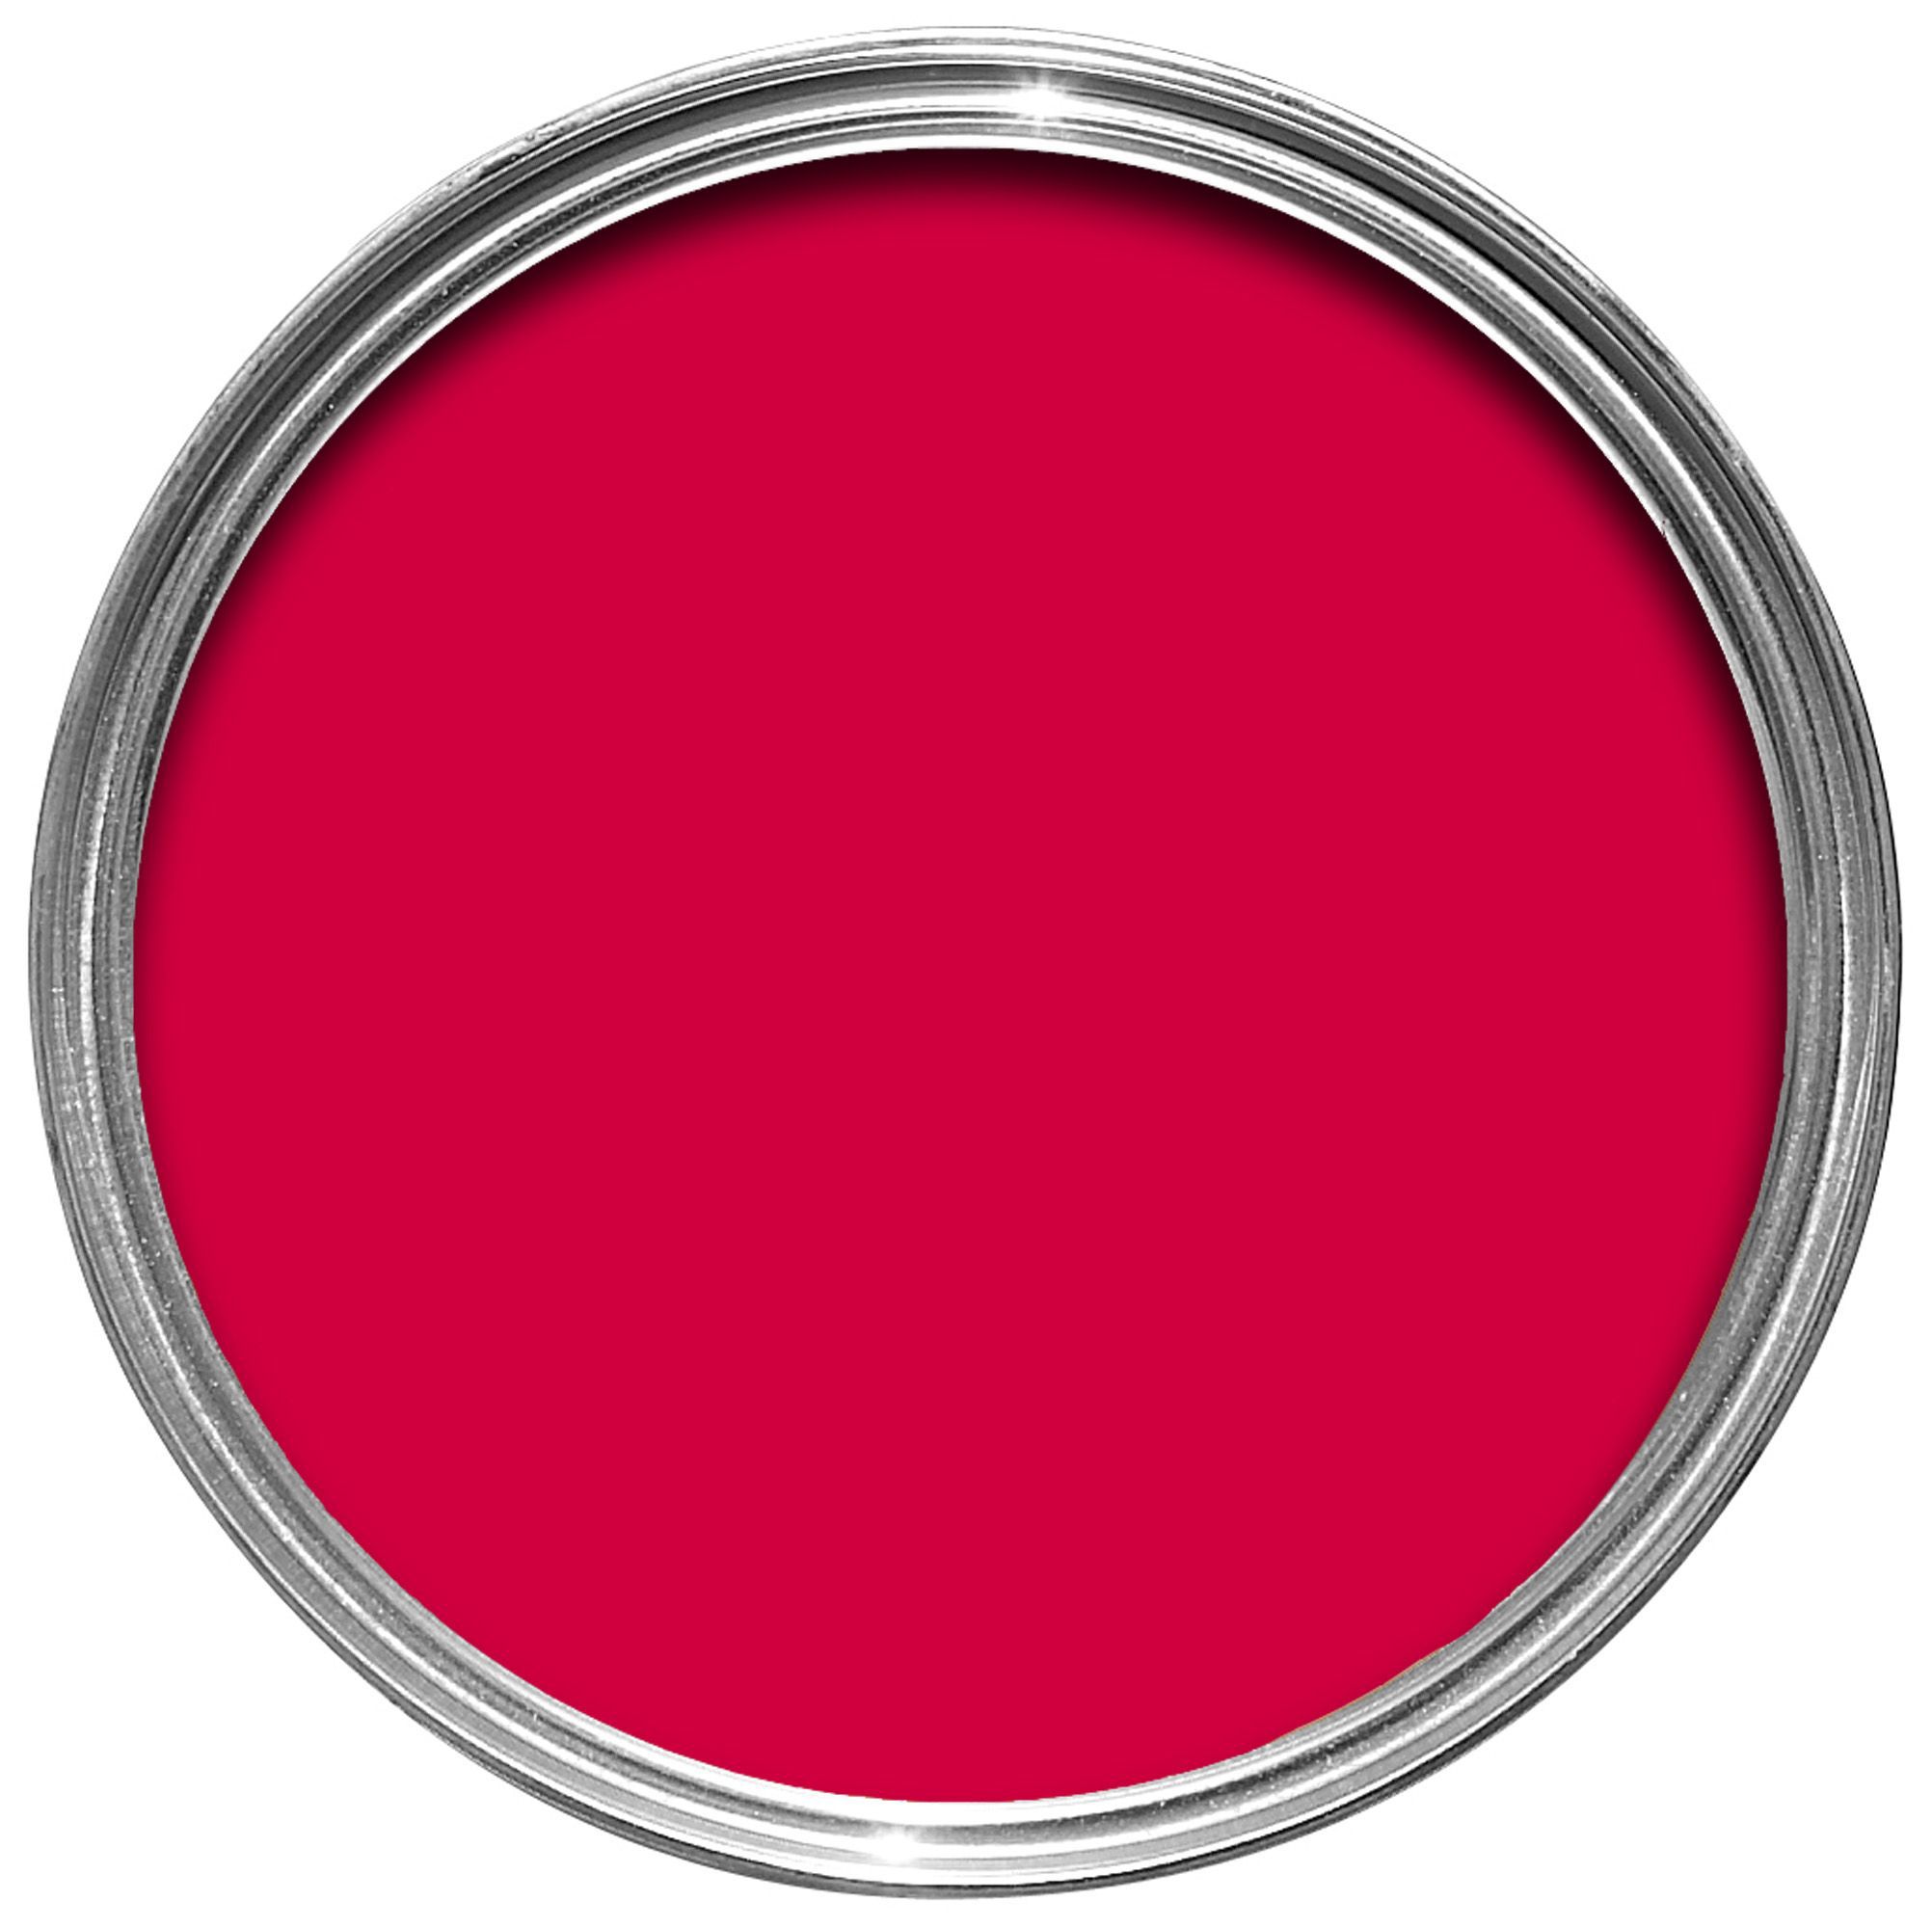 Rust-Oleum Painter's touch Cherry red Gloss Multi-surface paint, 250ml